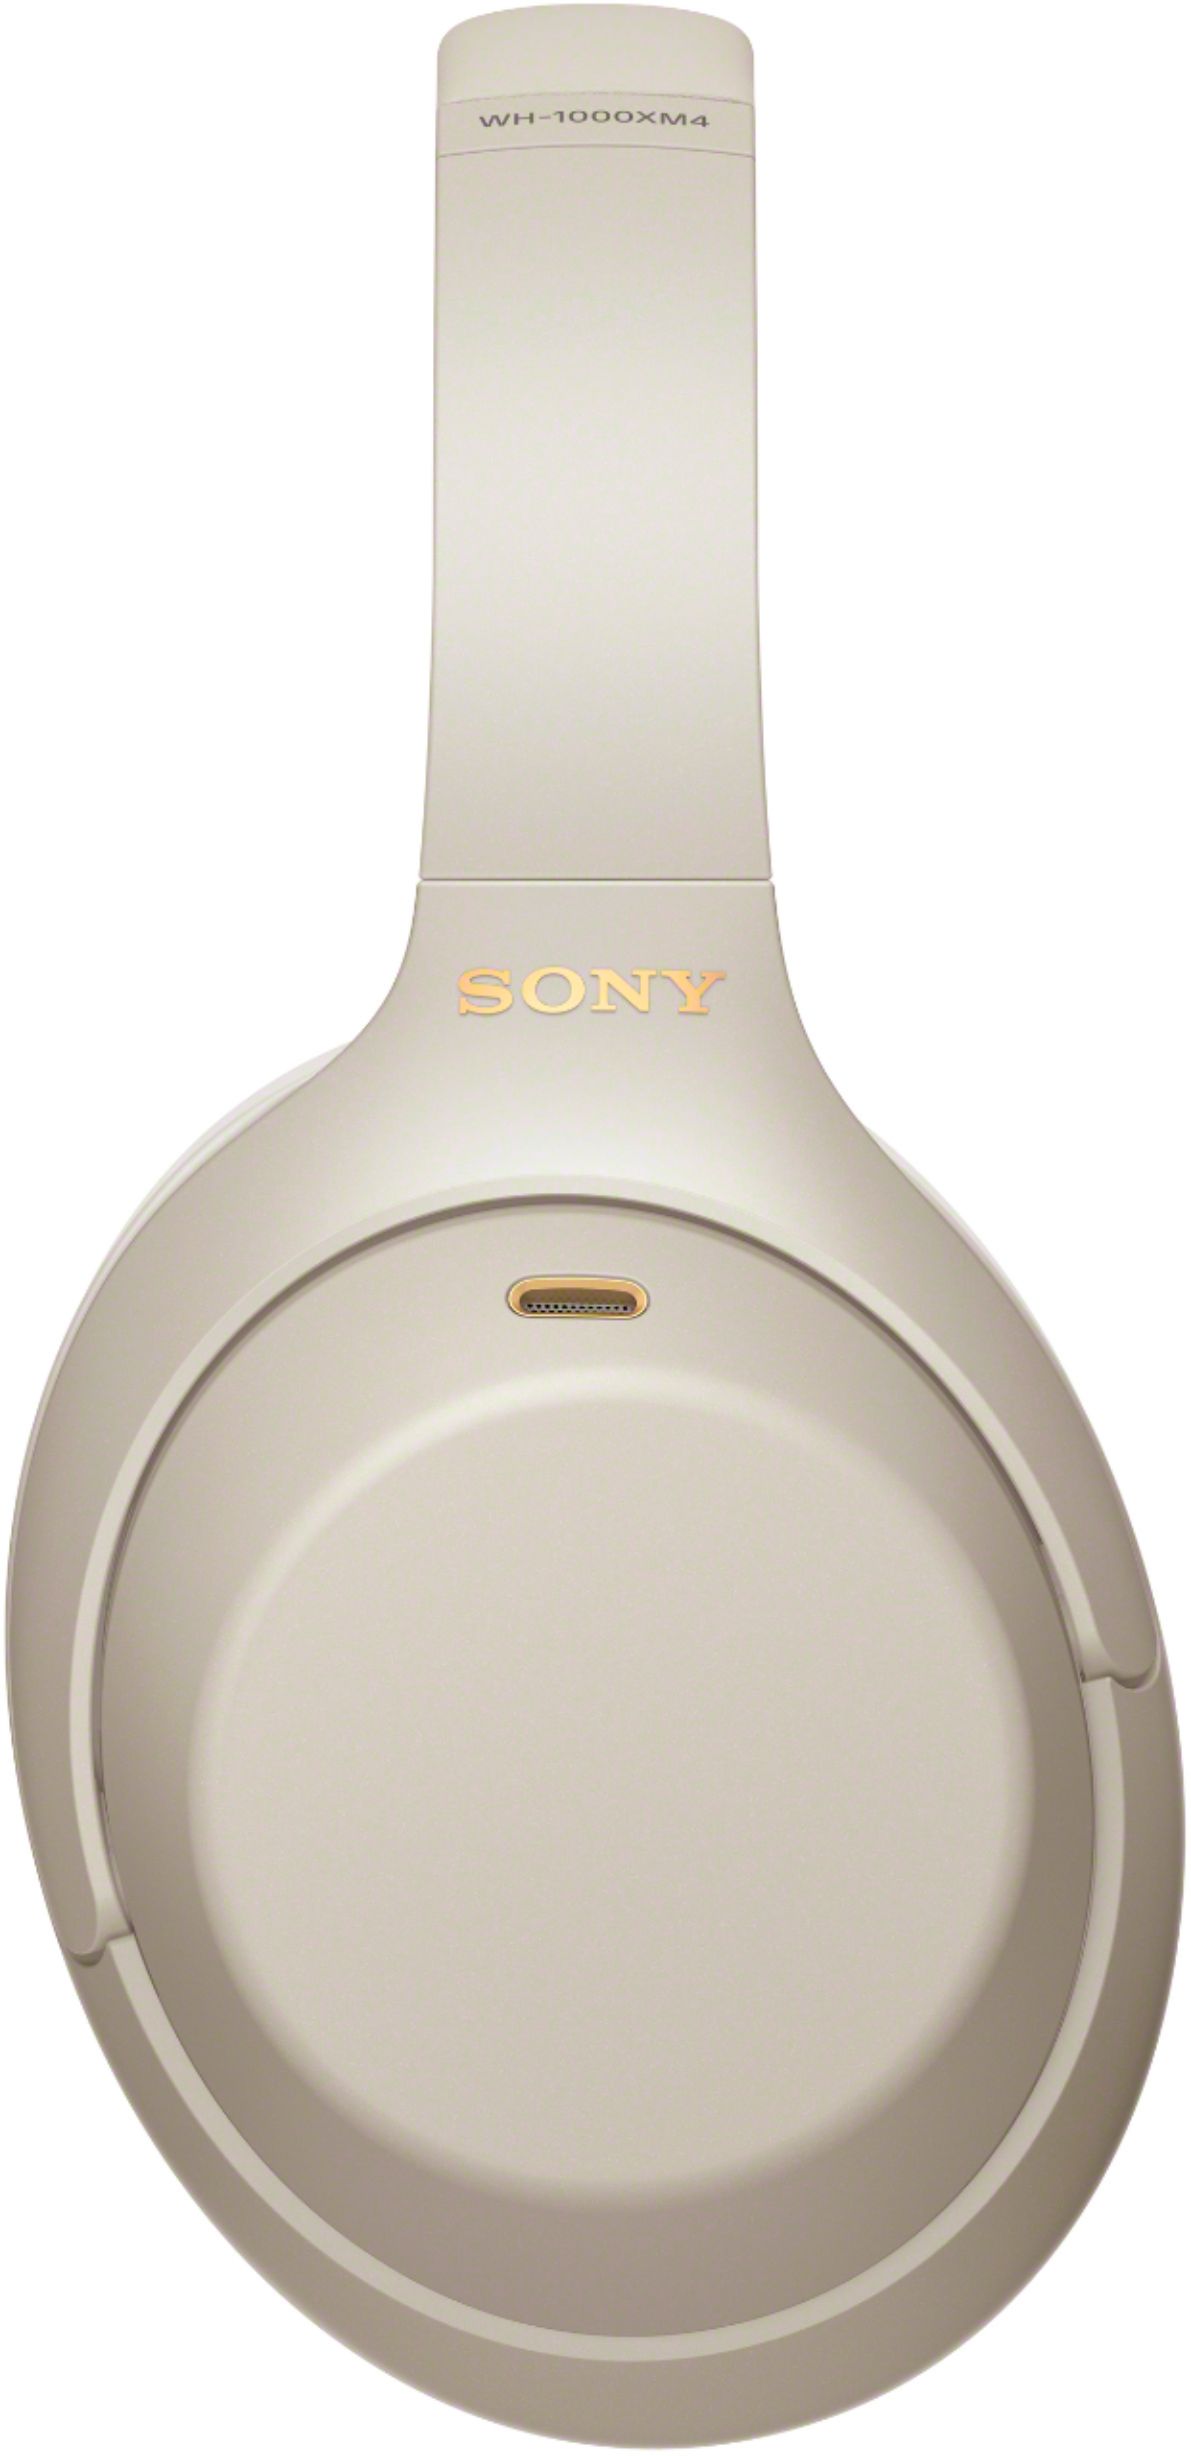 Sony WH-1000XM4 Wireless Noise-Cancelling Over-the-Ear Headphones 